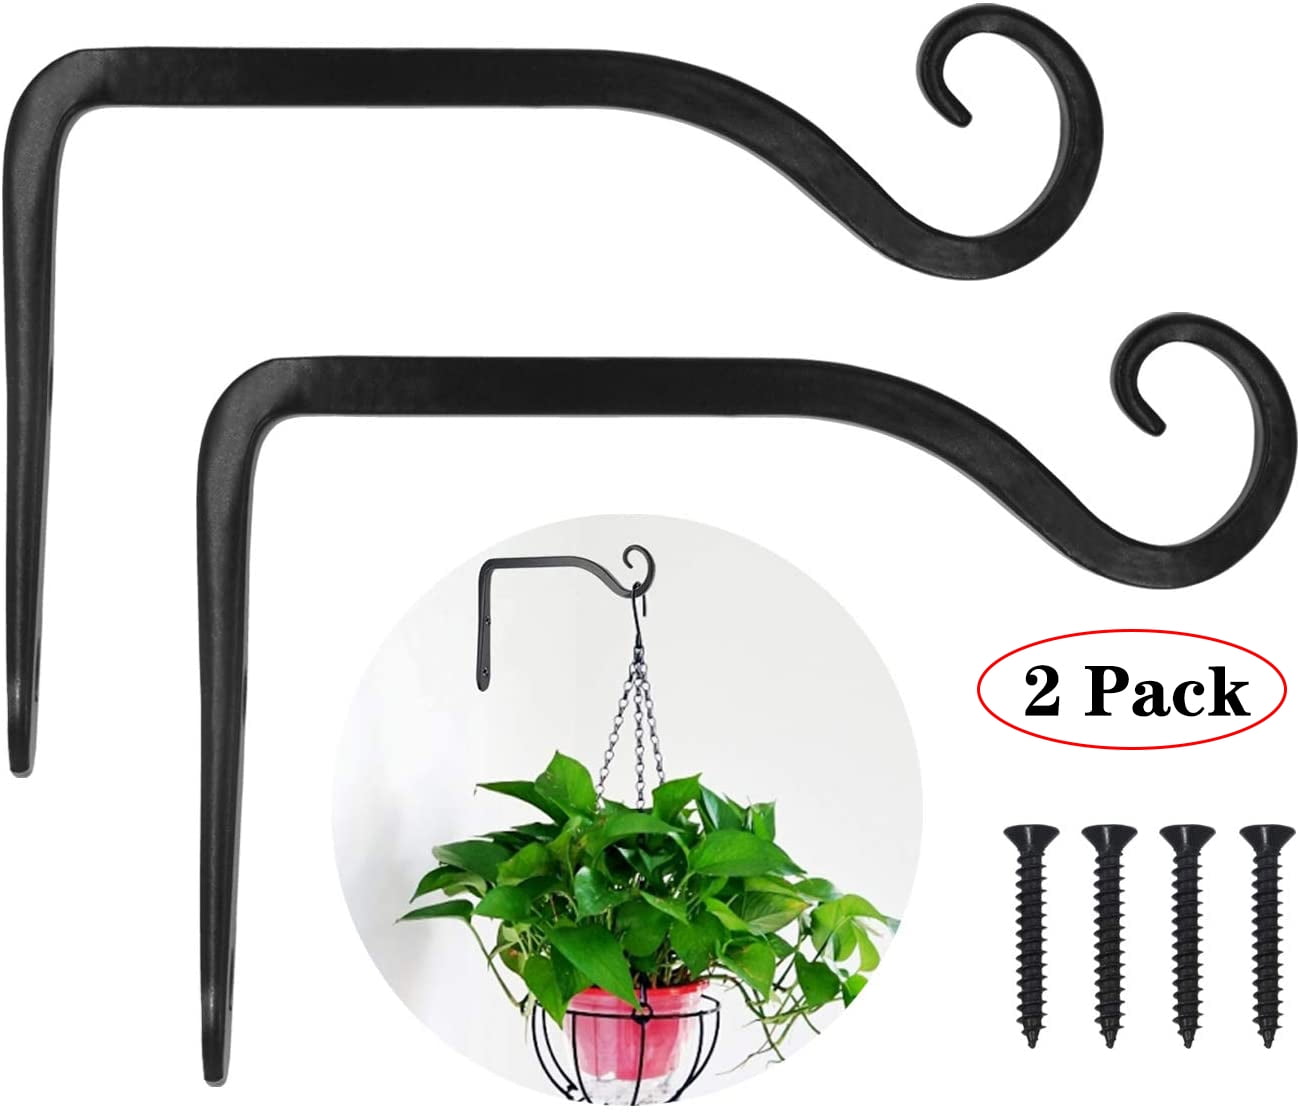 3 Inches,White Indoor Outdoor Rustic Home Decor Mkono 4 Pack Iron Wall Hooks Metal Lantern Bracket Decorative Coat Hook for Hanging Lantern,Bird Feeders,Wind Chimes,Plant Planter,Coat 